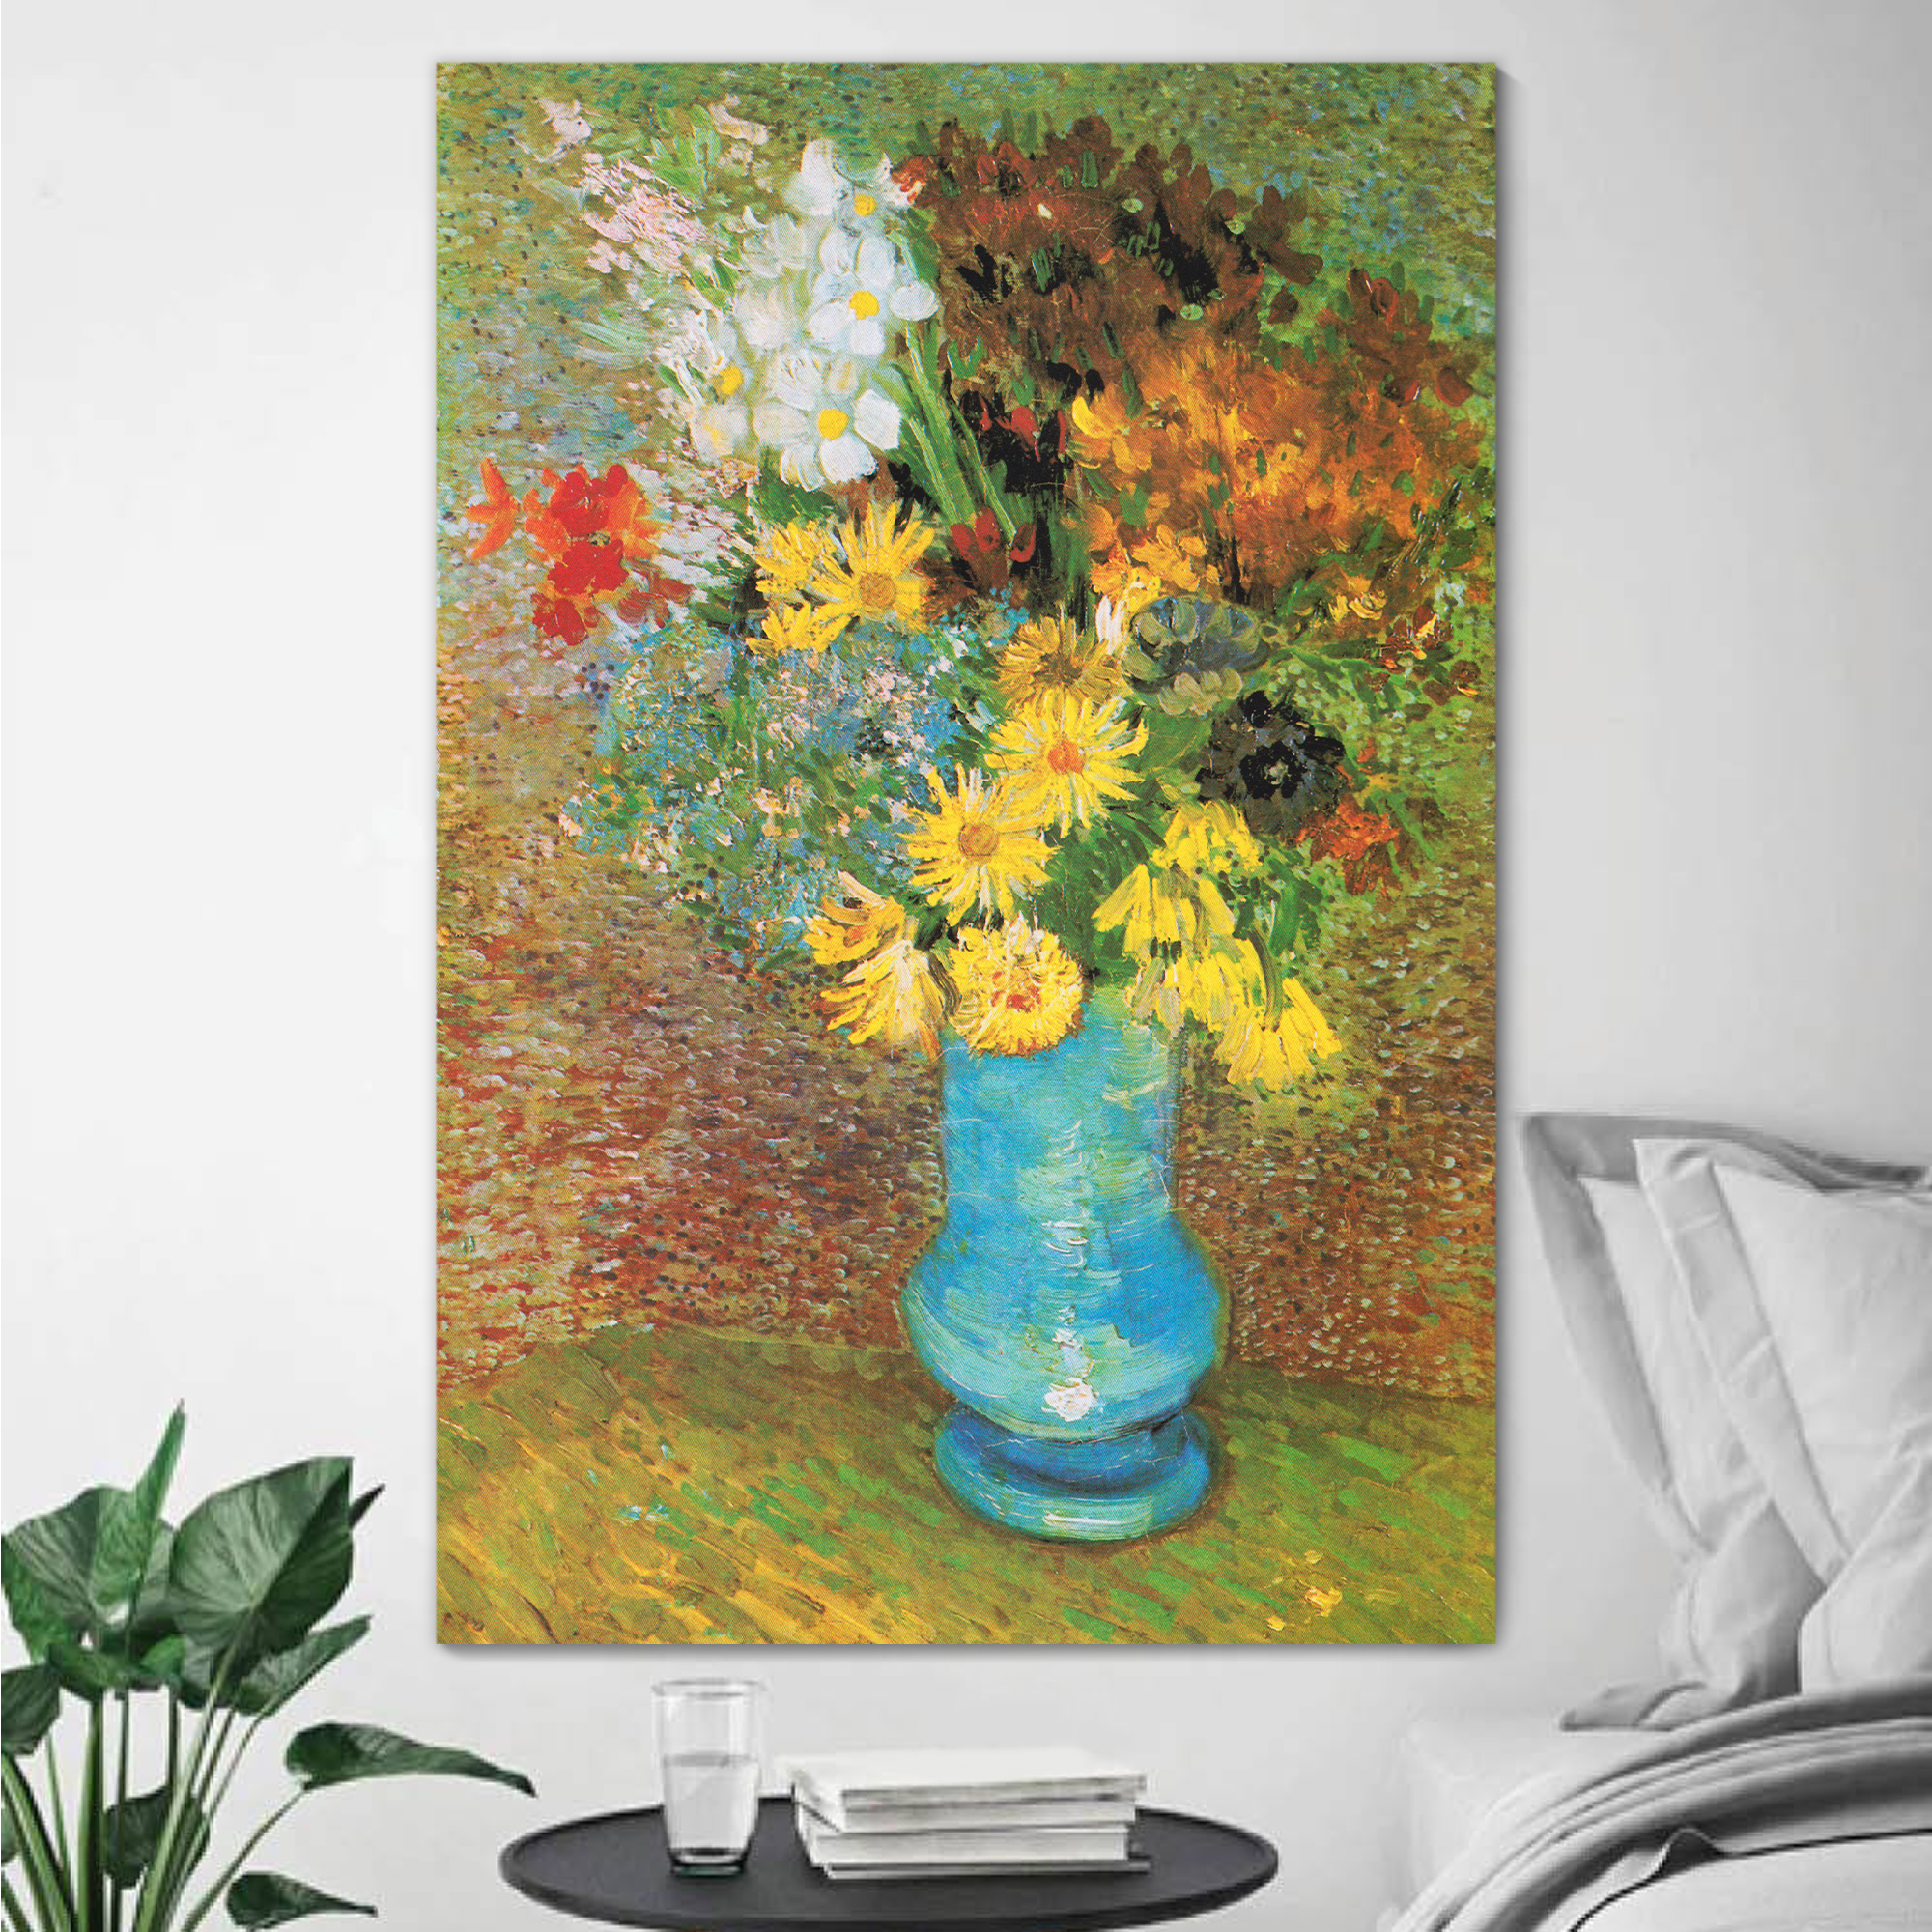 Flowers in a Blue Vase, 1887 by Vincent Van Gogh - Canvas Print Wall Art Famous Oil Painting Reproduction - 32